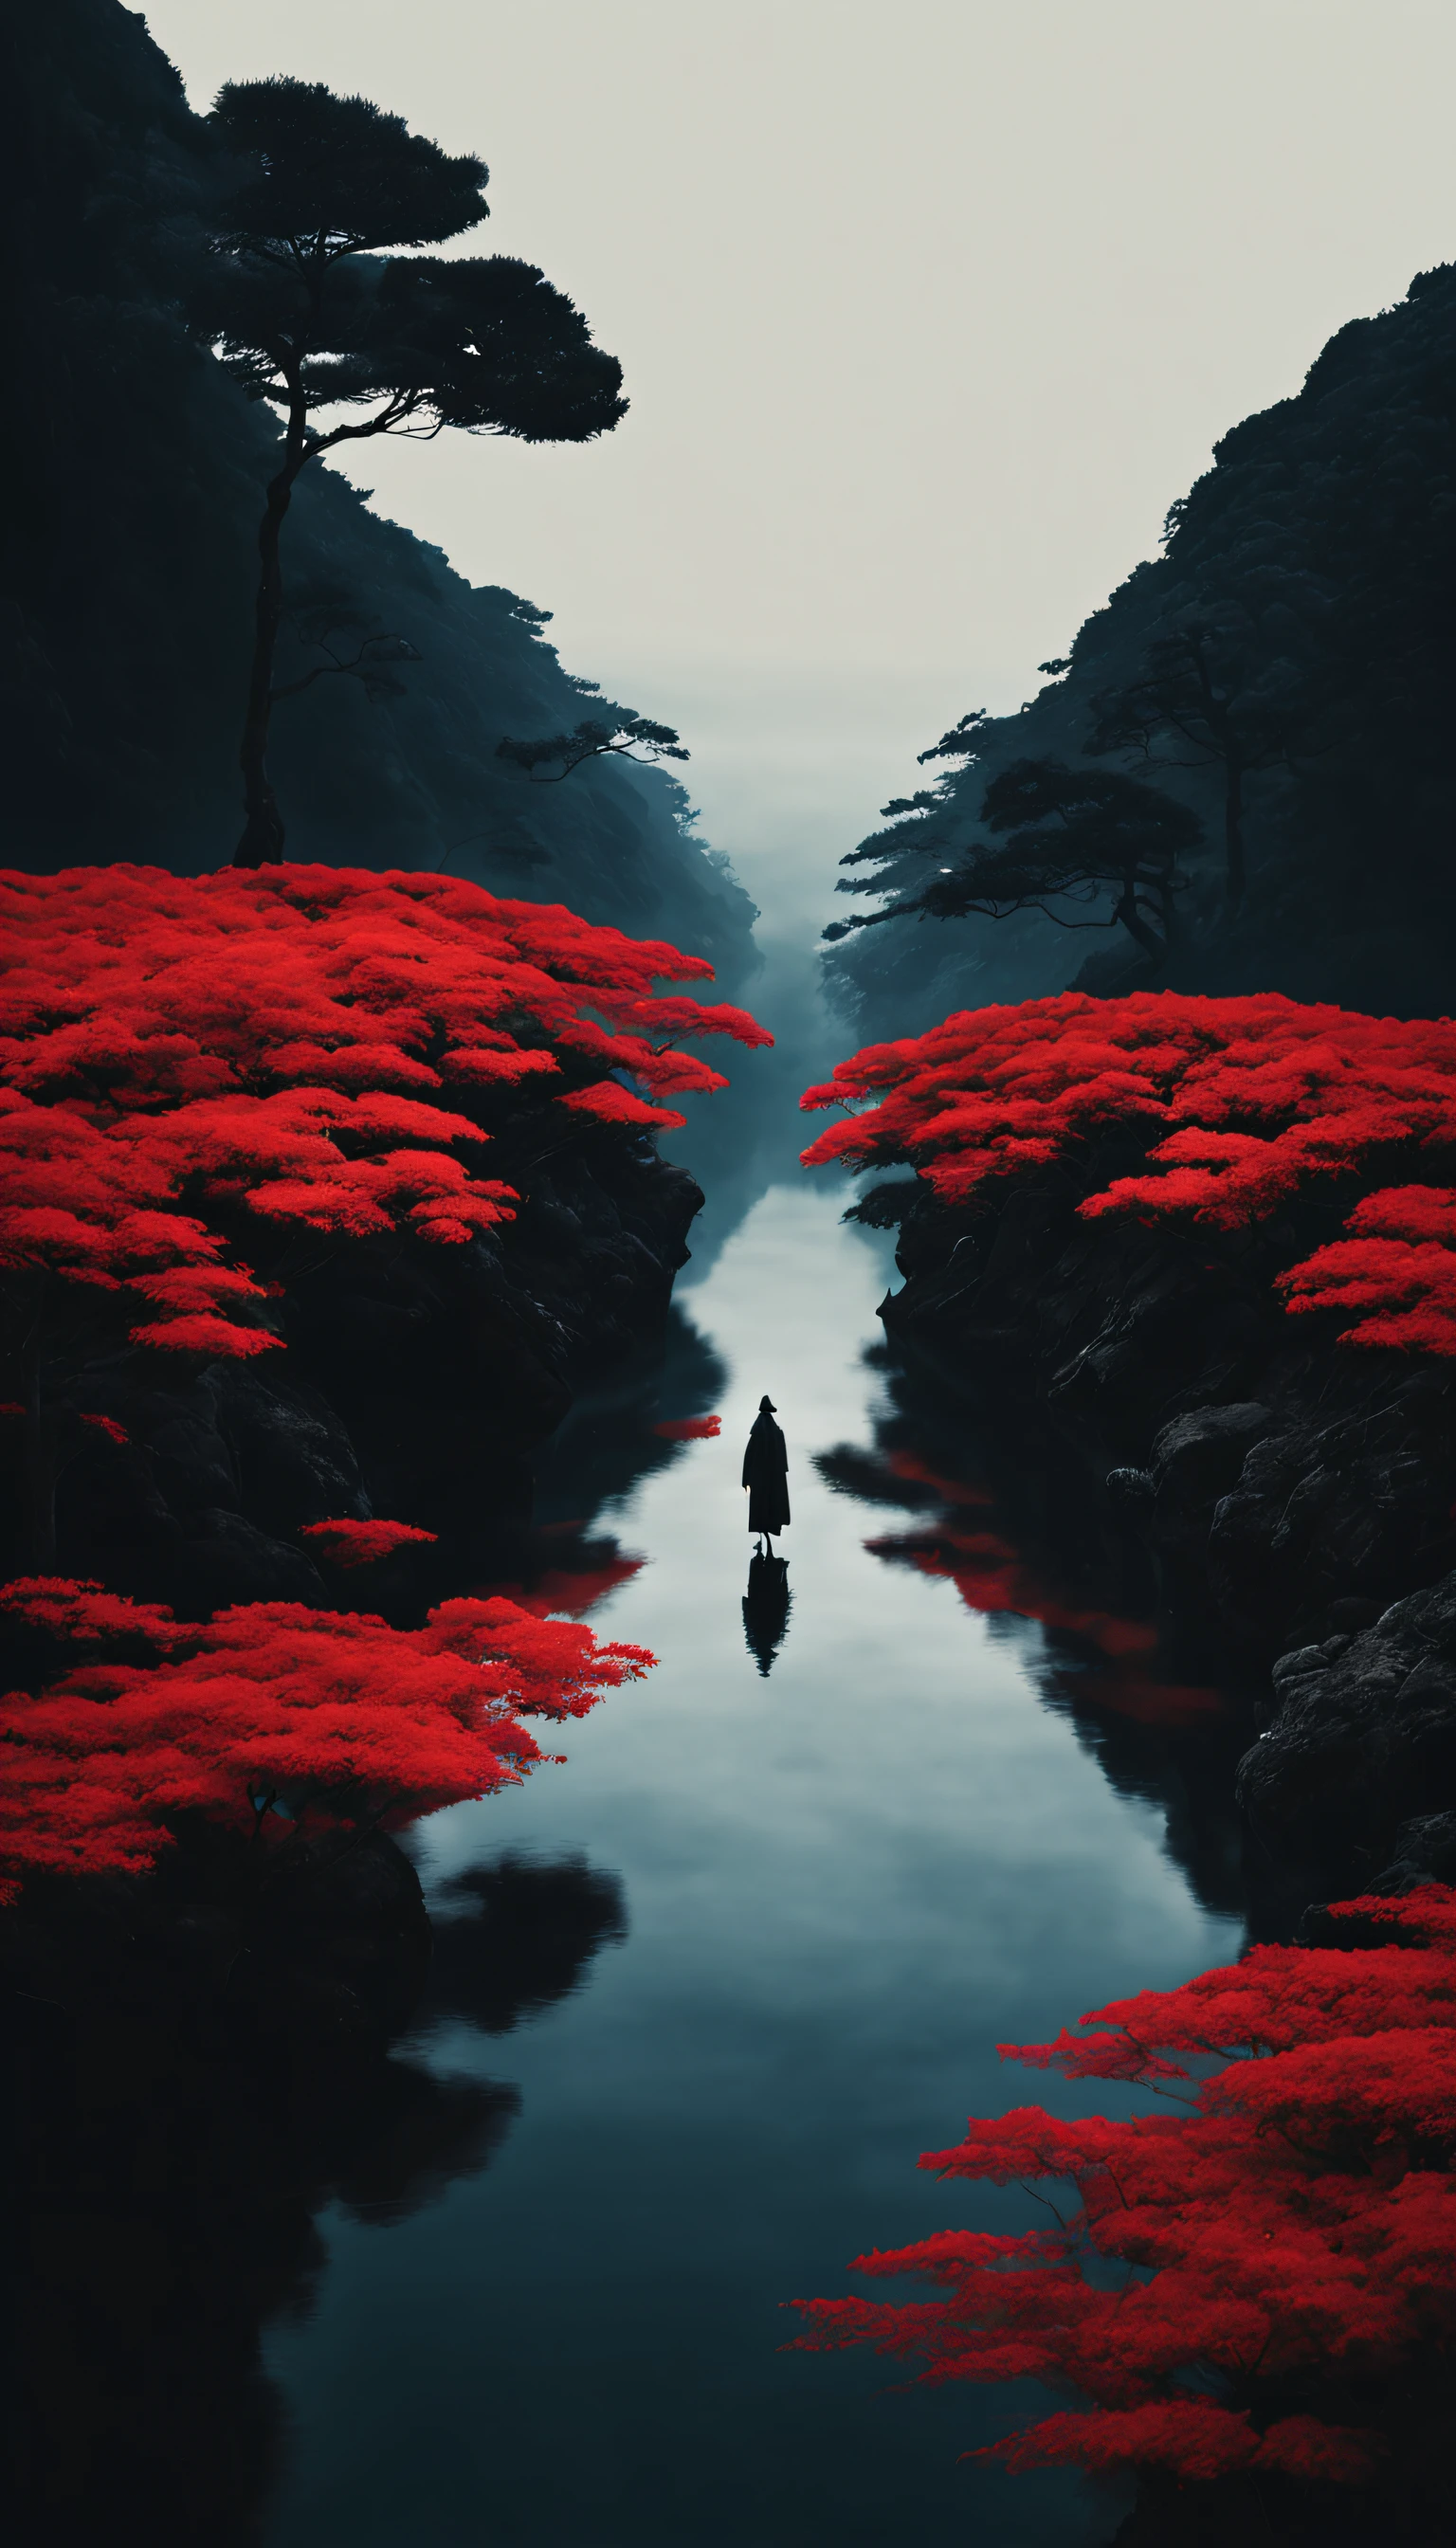 Infinity's Edge, Minimalistic Photography in the style of Felicia Simion and Studio Ghibli, Minimalism, Fine Art, Cinematic, Negative Space, In the style of Artistic Darkness, Surrealism, Ukiyo-E Vibes 00 --ar 9:16 --chaos 15 --version 5.2 --s 2